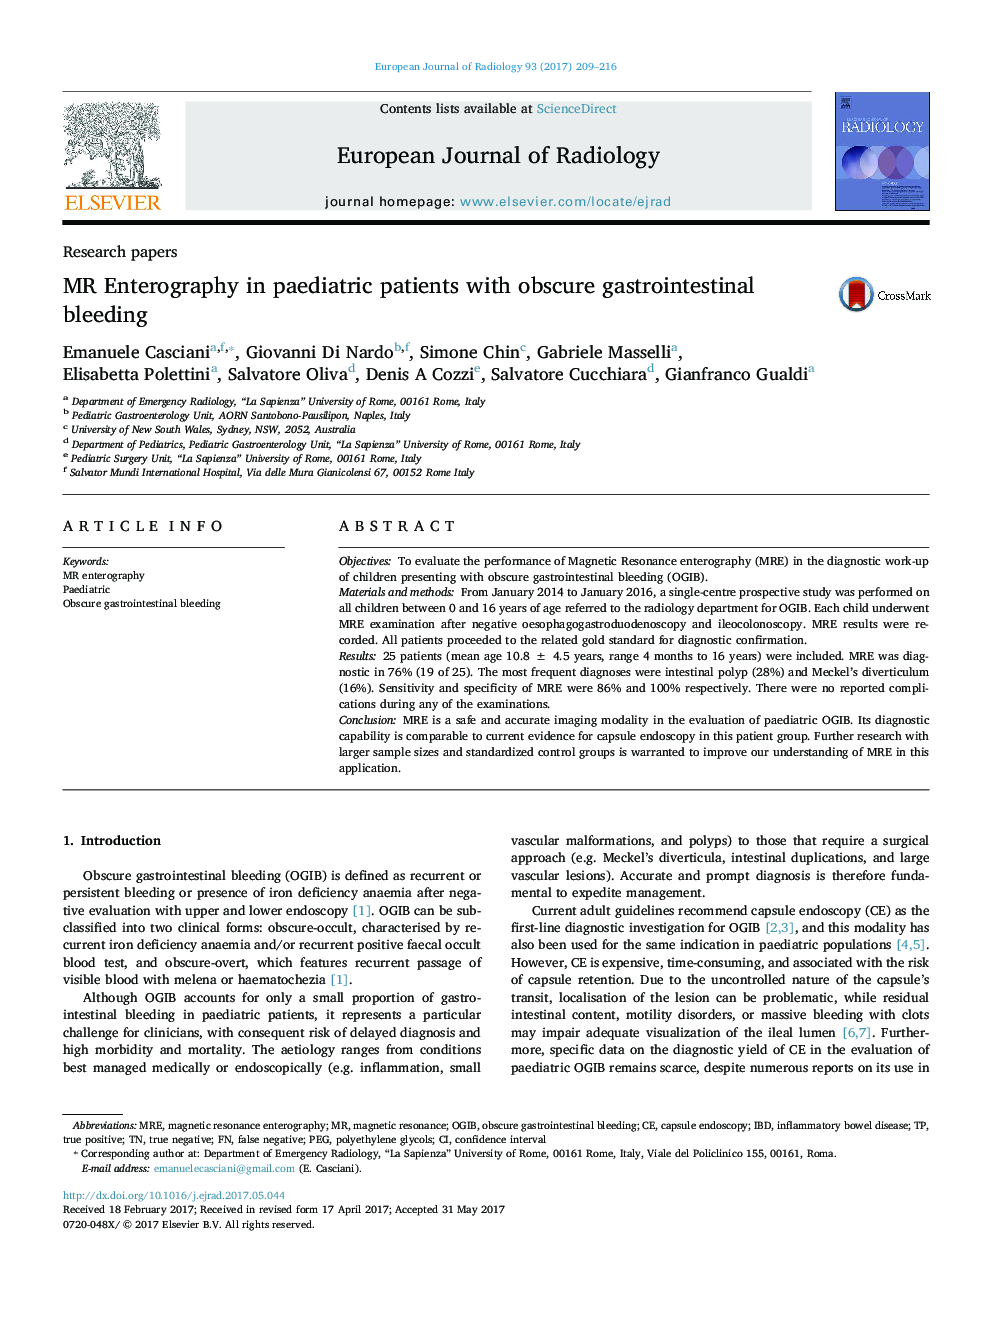 Research papersMR Enterography in paediatric patients with obscure gastrointestinal bleeding